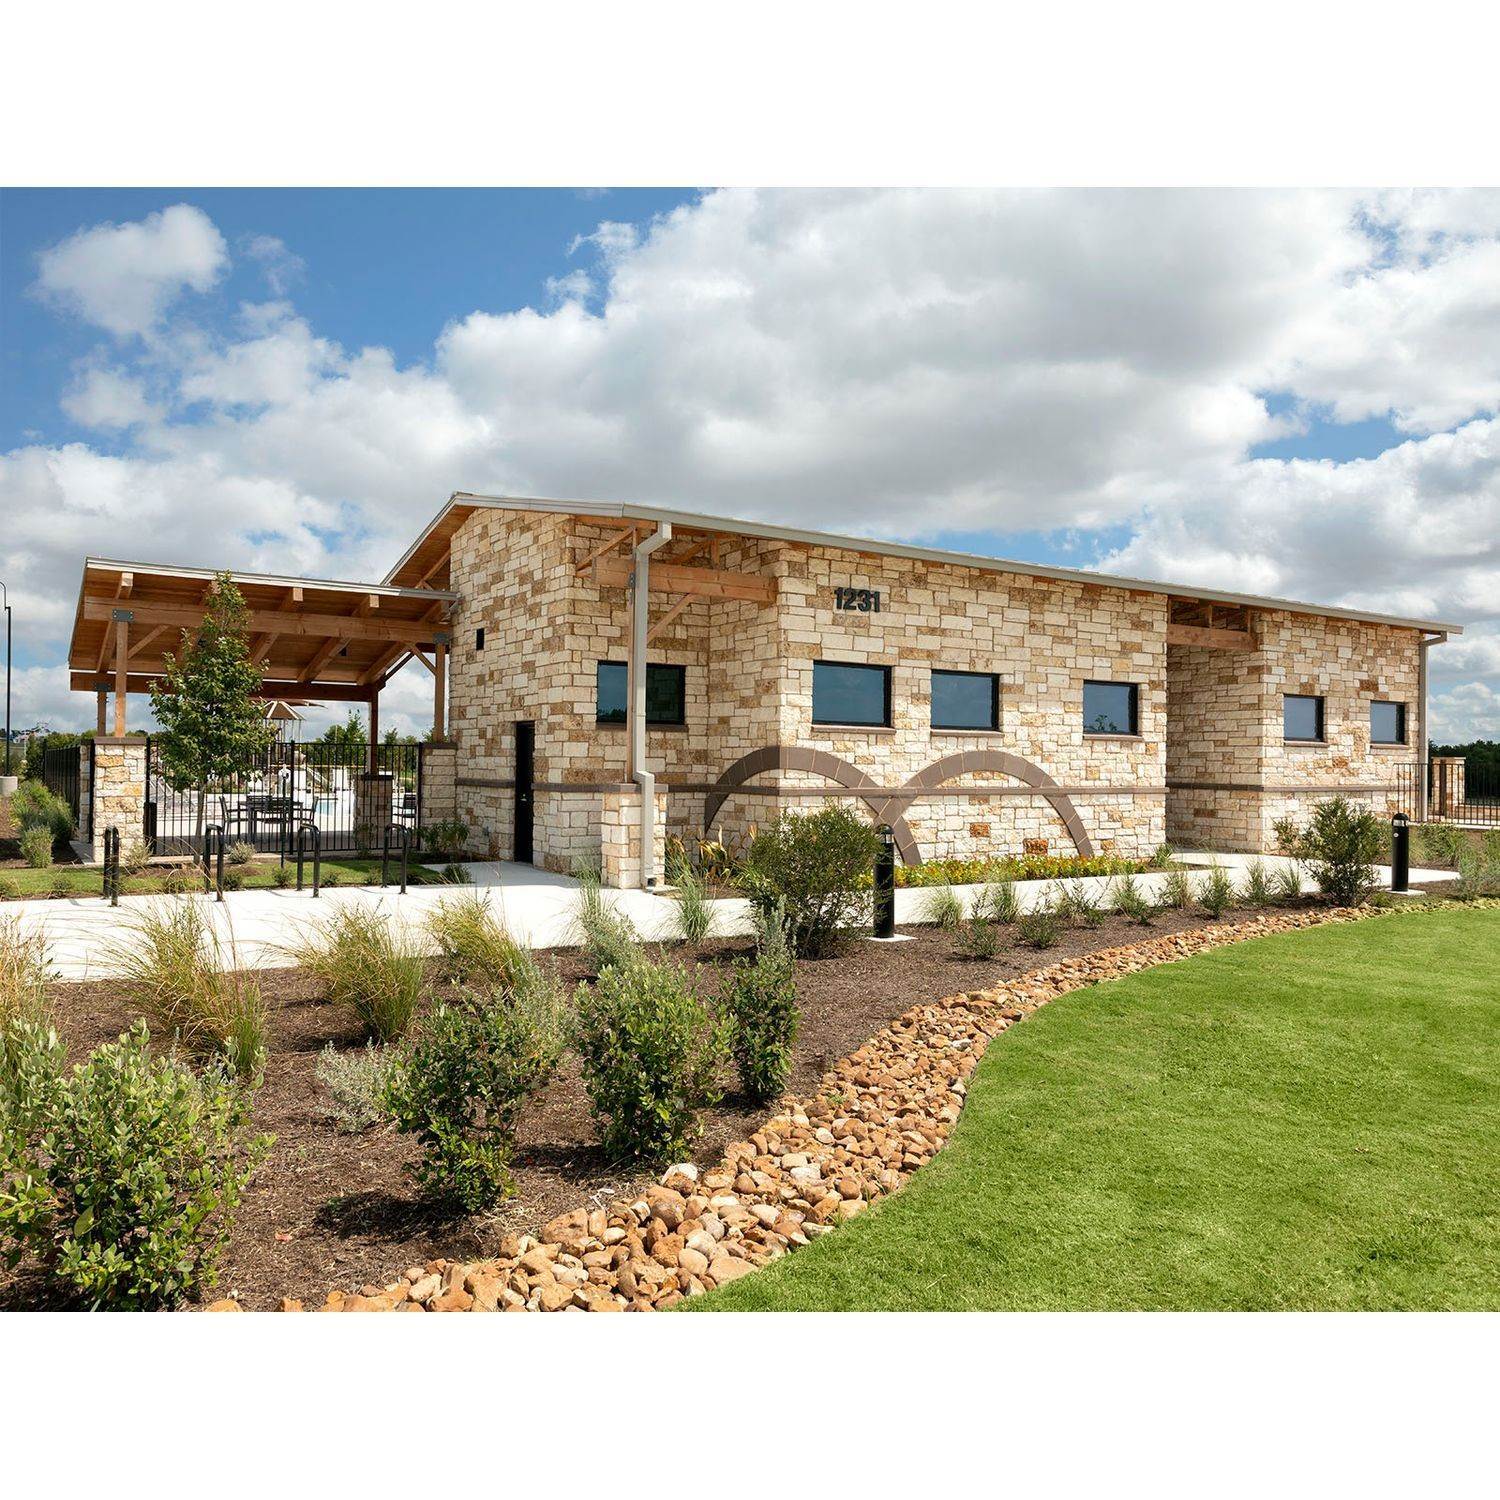 17. Homestead at Old Settlers Park building at 1520 Homestead Farms Drive, Round Rock, TX 78665